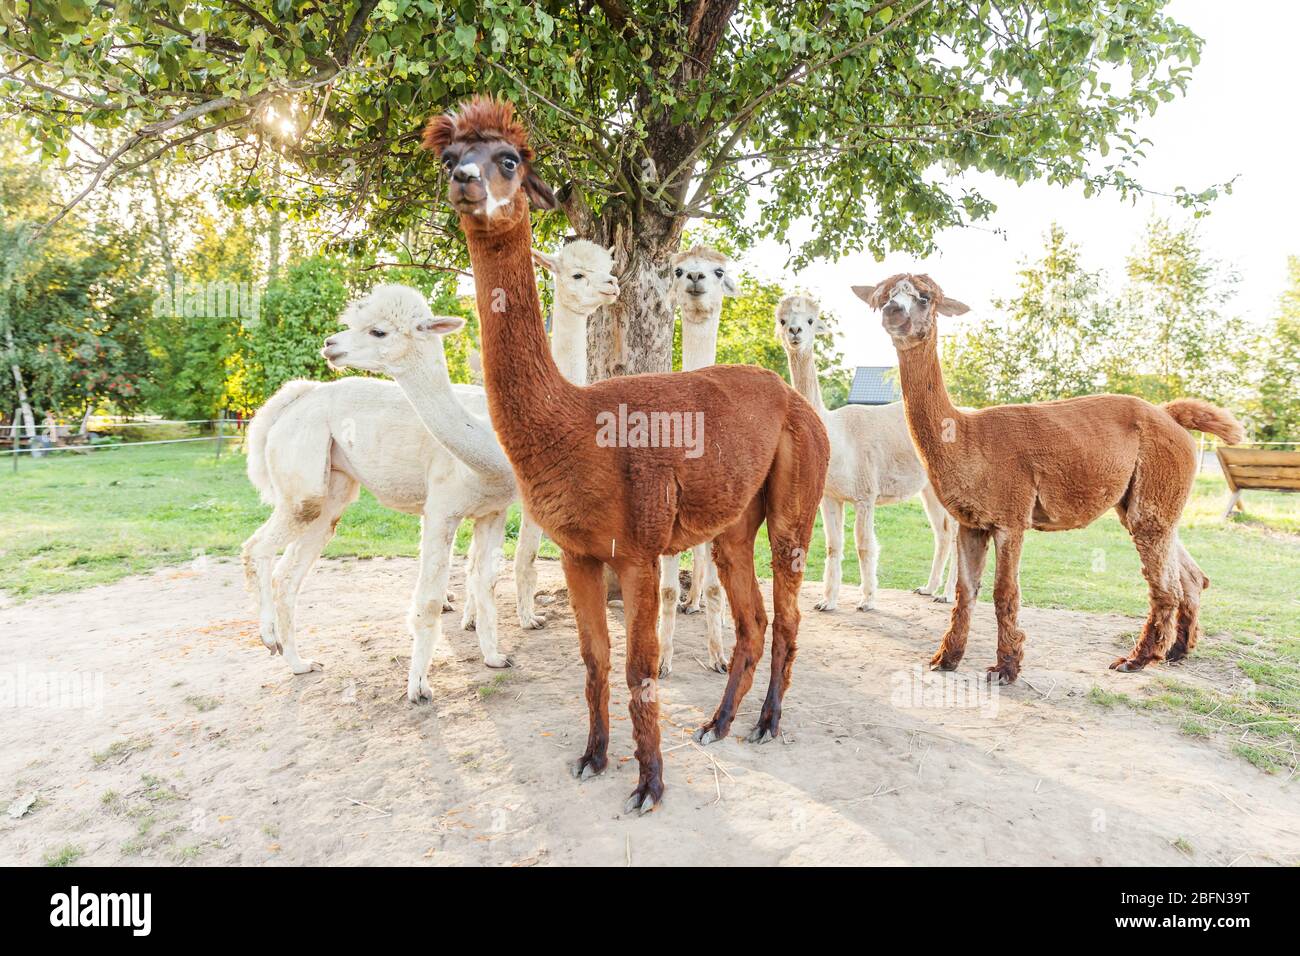 Cute Alpaca With Funny Face Relaxing On Ranch In Summer Day Domestic Alpacas Grazing On Pasture In Natural Eco Farm Countryside Background Animal Care And Ecological Farming Concept Stock Photo Alamy